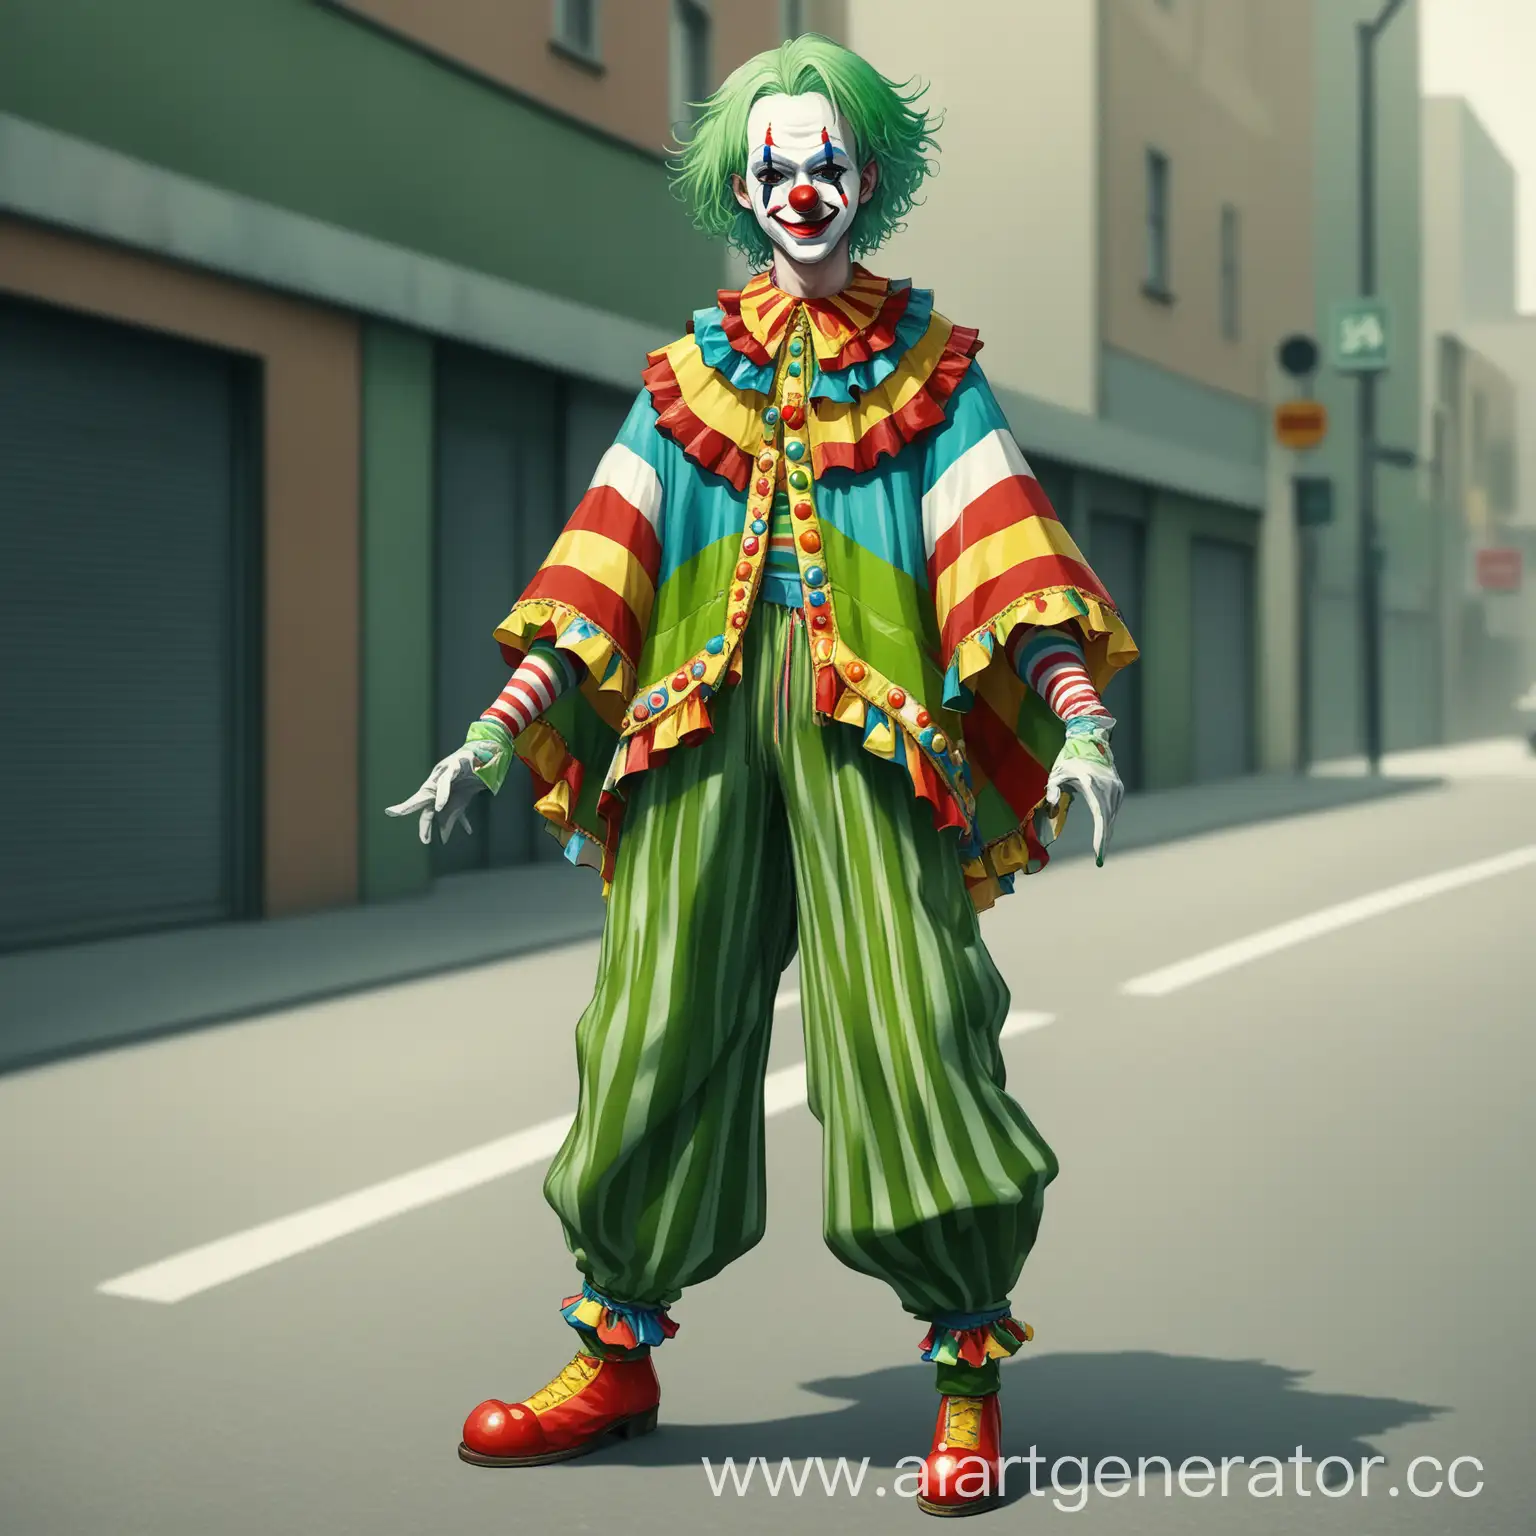 Colorful-GreenHaired-Clown-in-Elaborate-Costume